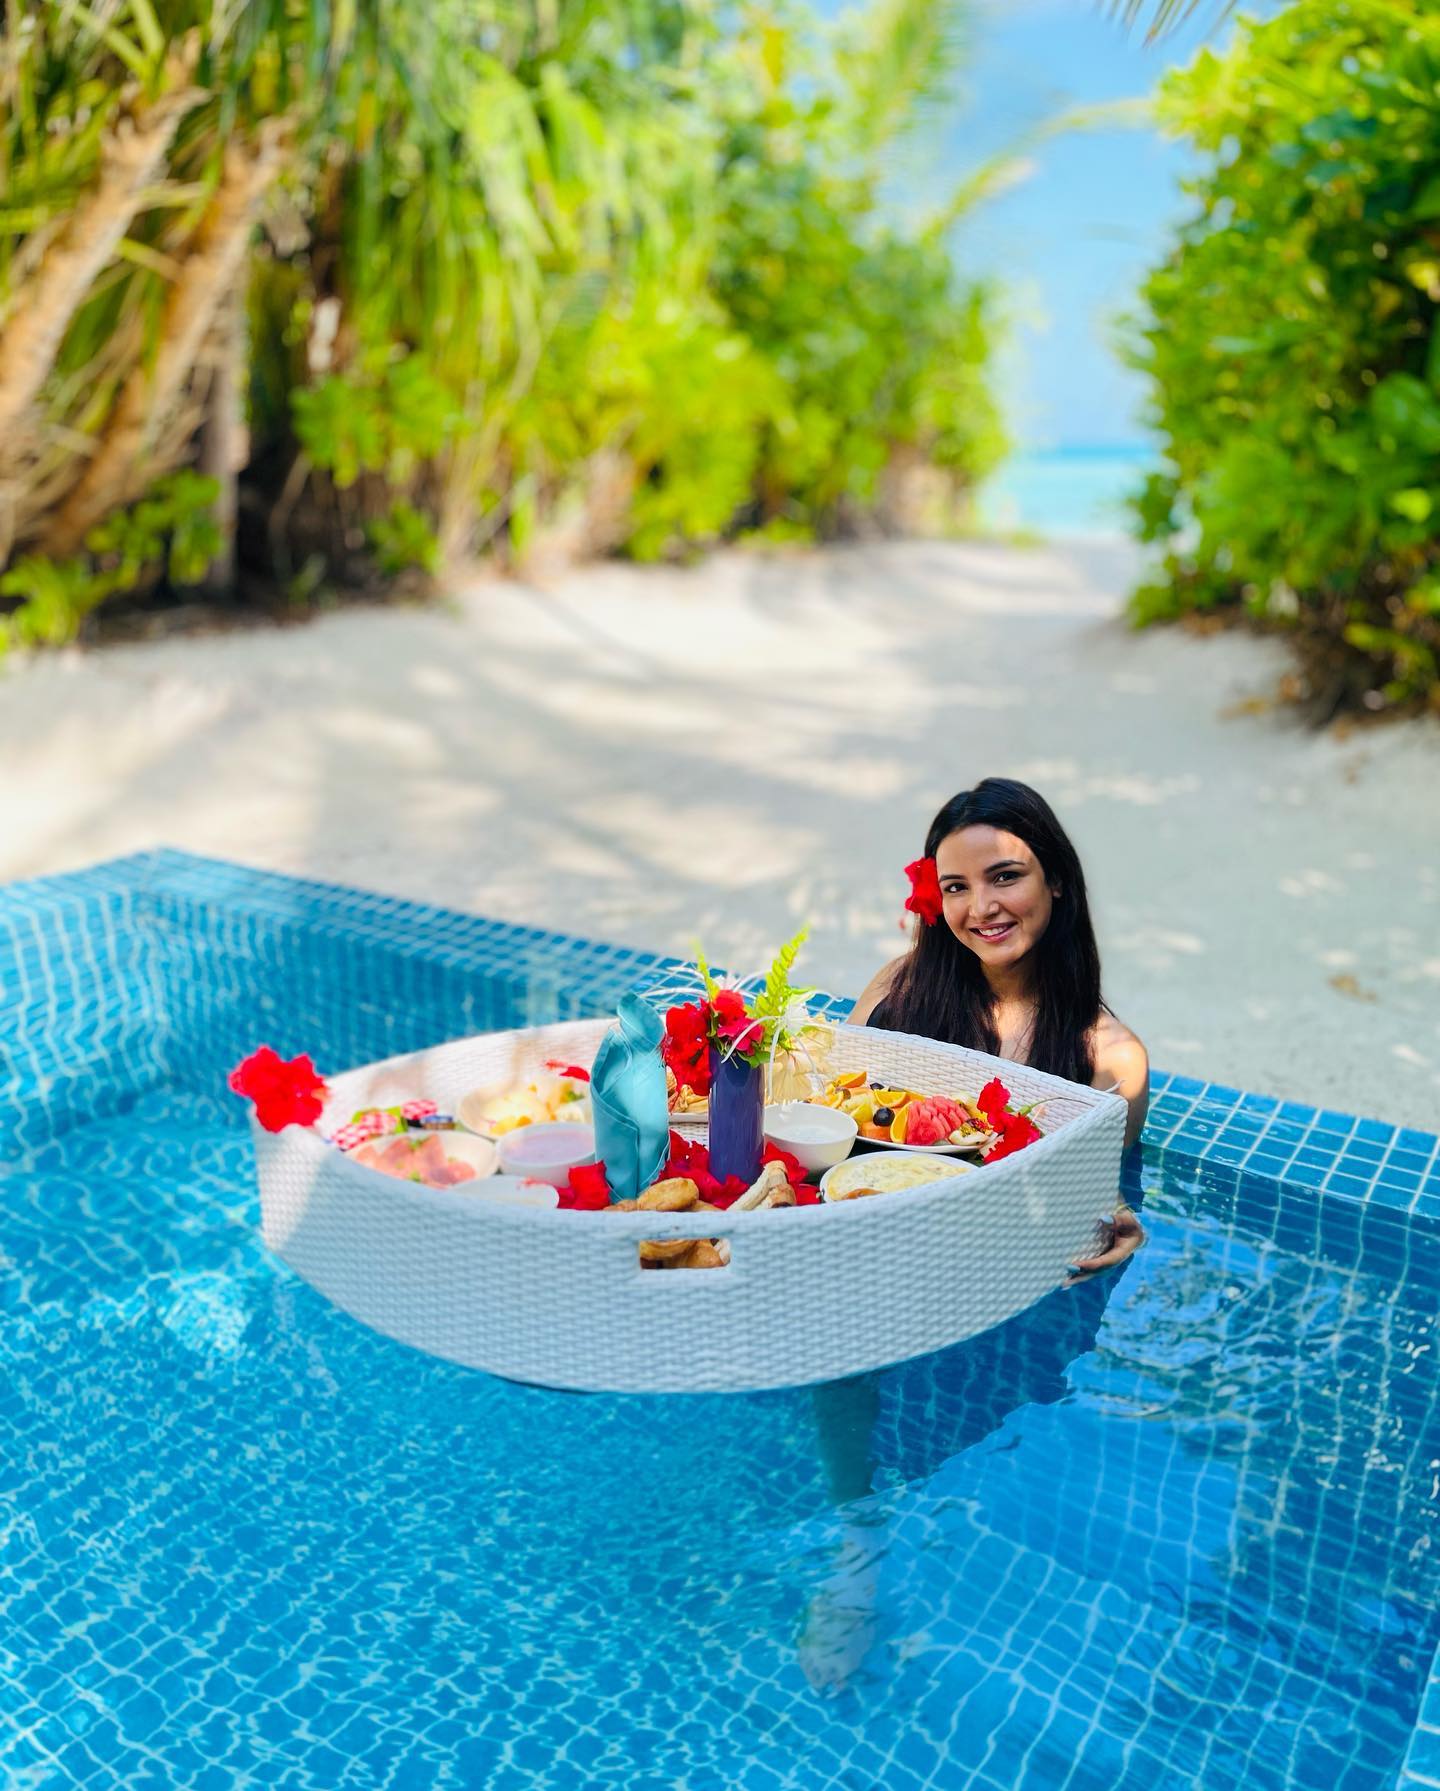 281861717 544874167233576 5338527563912296177 n Jasmine Bhasin went to Maldives vacation soon after the announcement of marriage with Ali Goni, the actress looked very beautiful in a black bikini